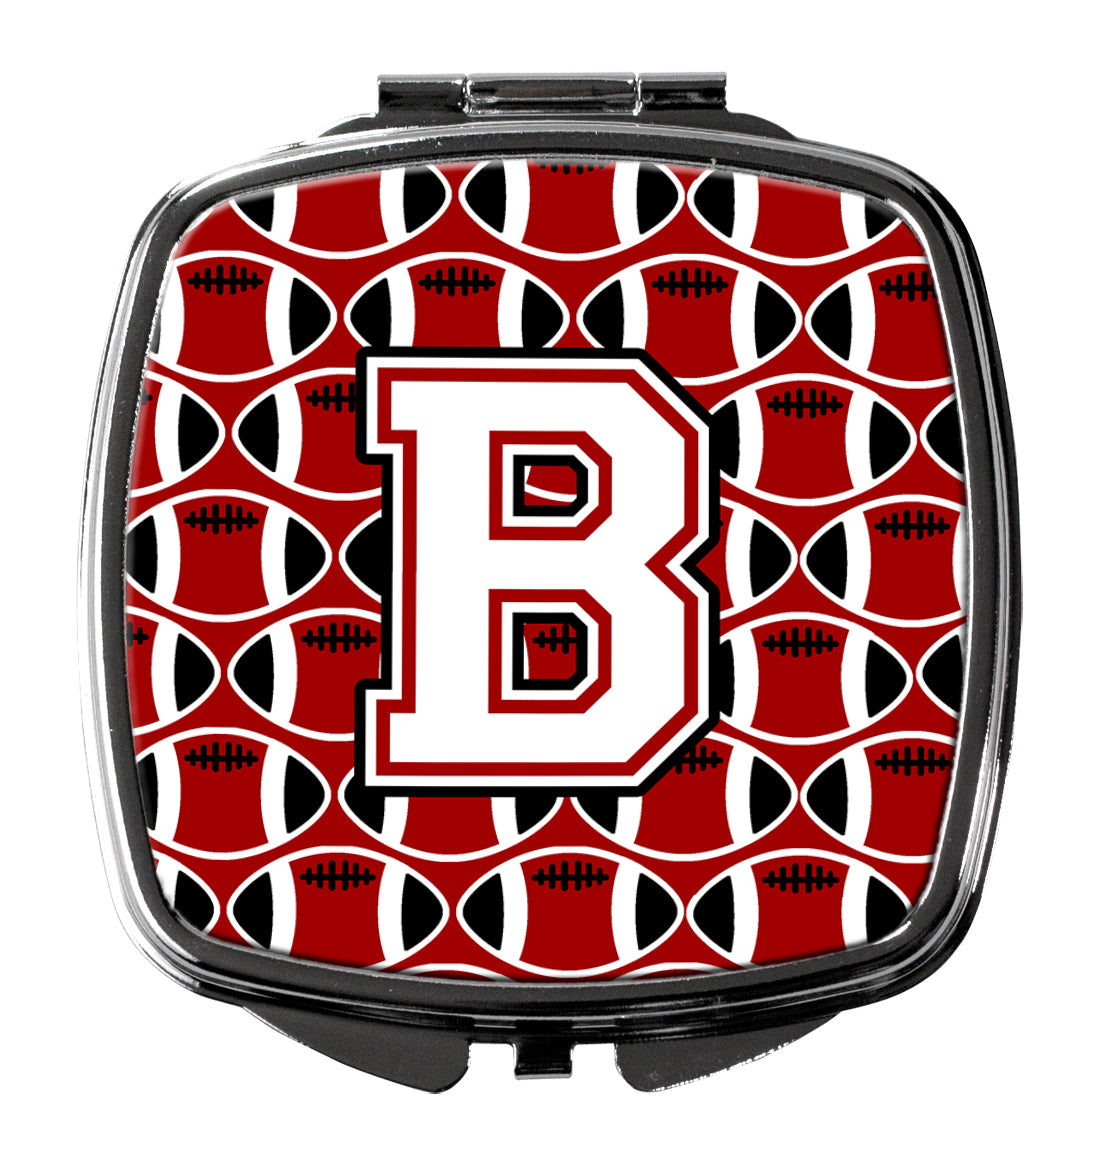 Letter B Football Cardinal and White Compact Mirror CJ1082-BSCM